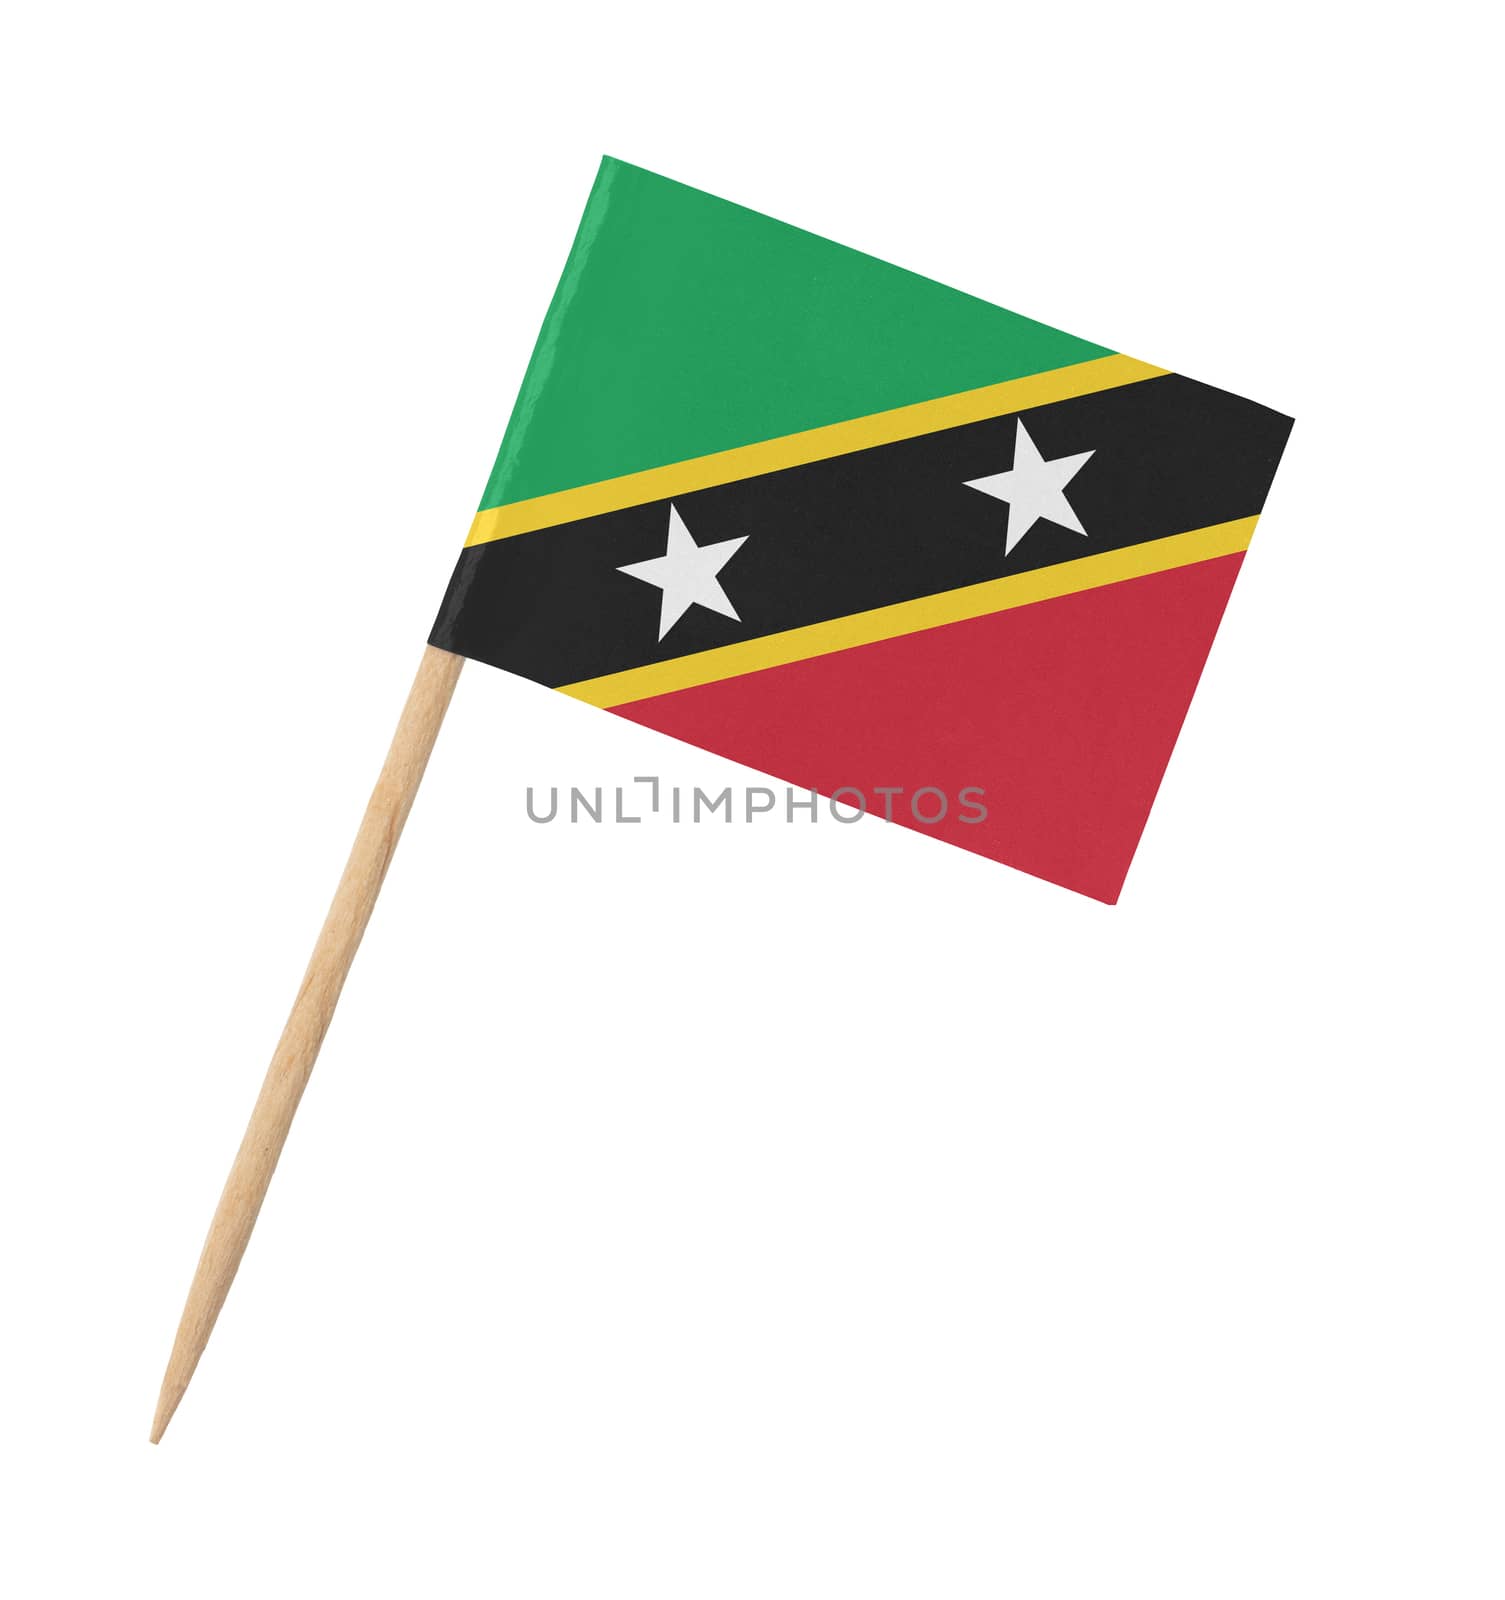 Small paper flag of Saint Kitts and Nevis on wooden stick, isolated on white